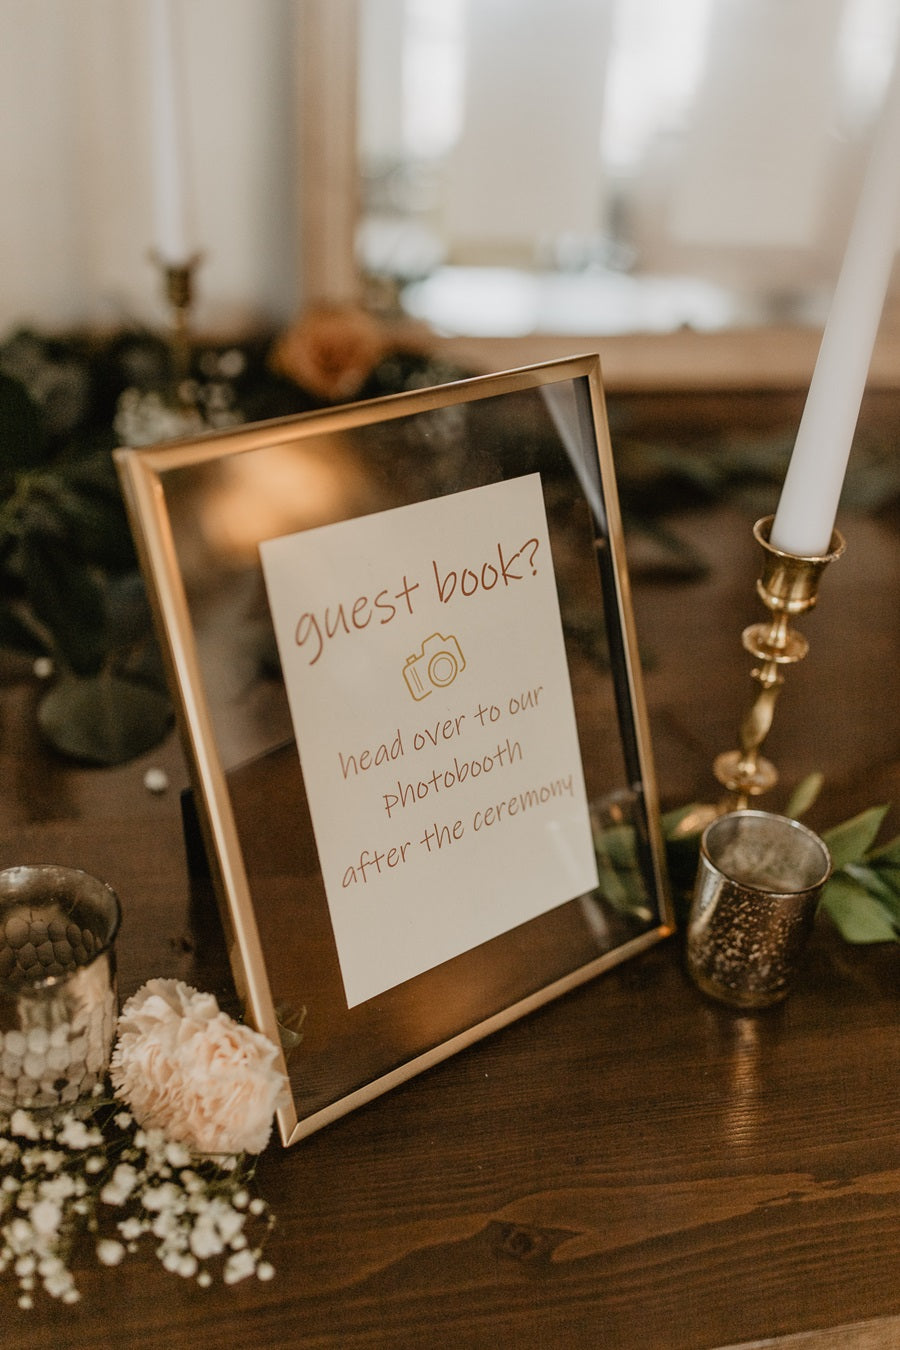 A small glass frame with "guest book?" "head over to our photobooth after the ceremony". Accented with loose florals, votives, and taper candles. 